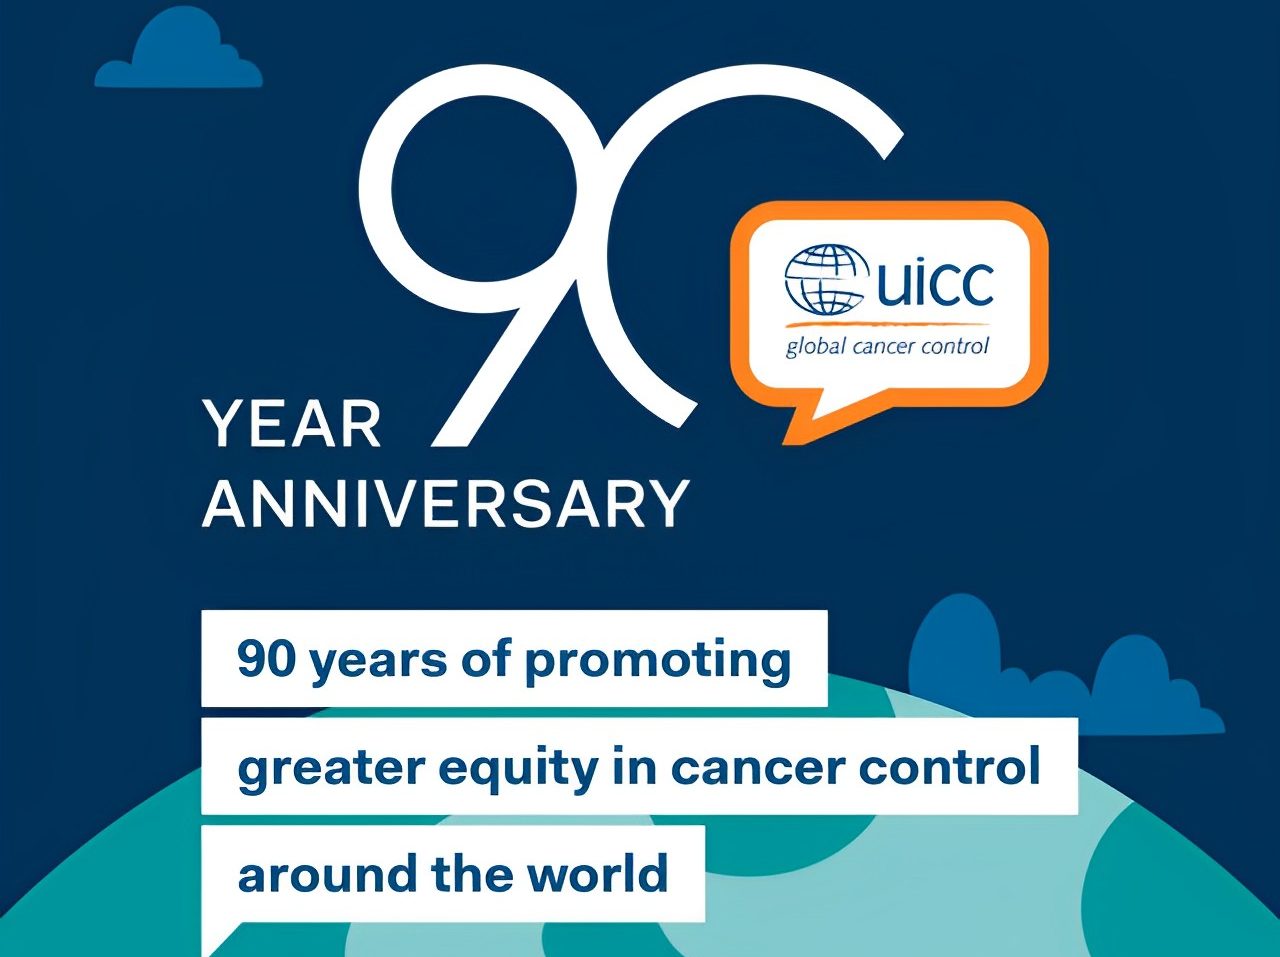 Join us in celebrating 90 years of progress towards closing the gap in cancer care around the world! – Union for International Cancer Control (UICC)